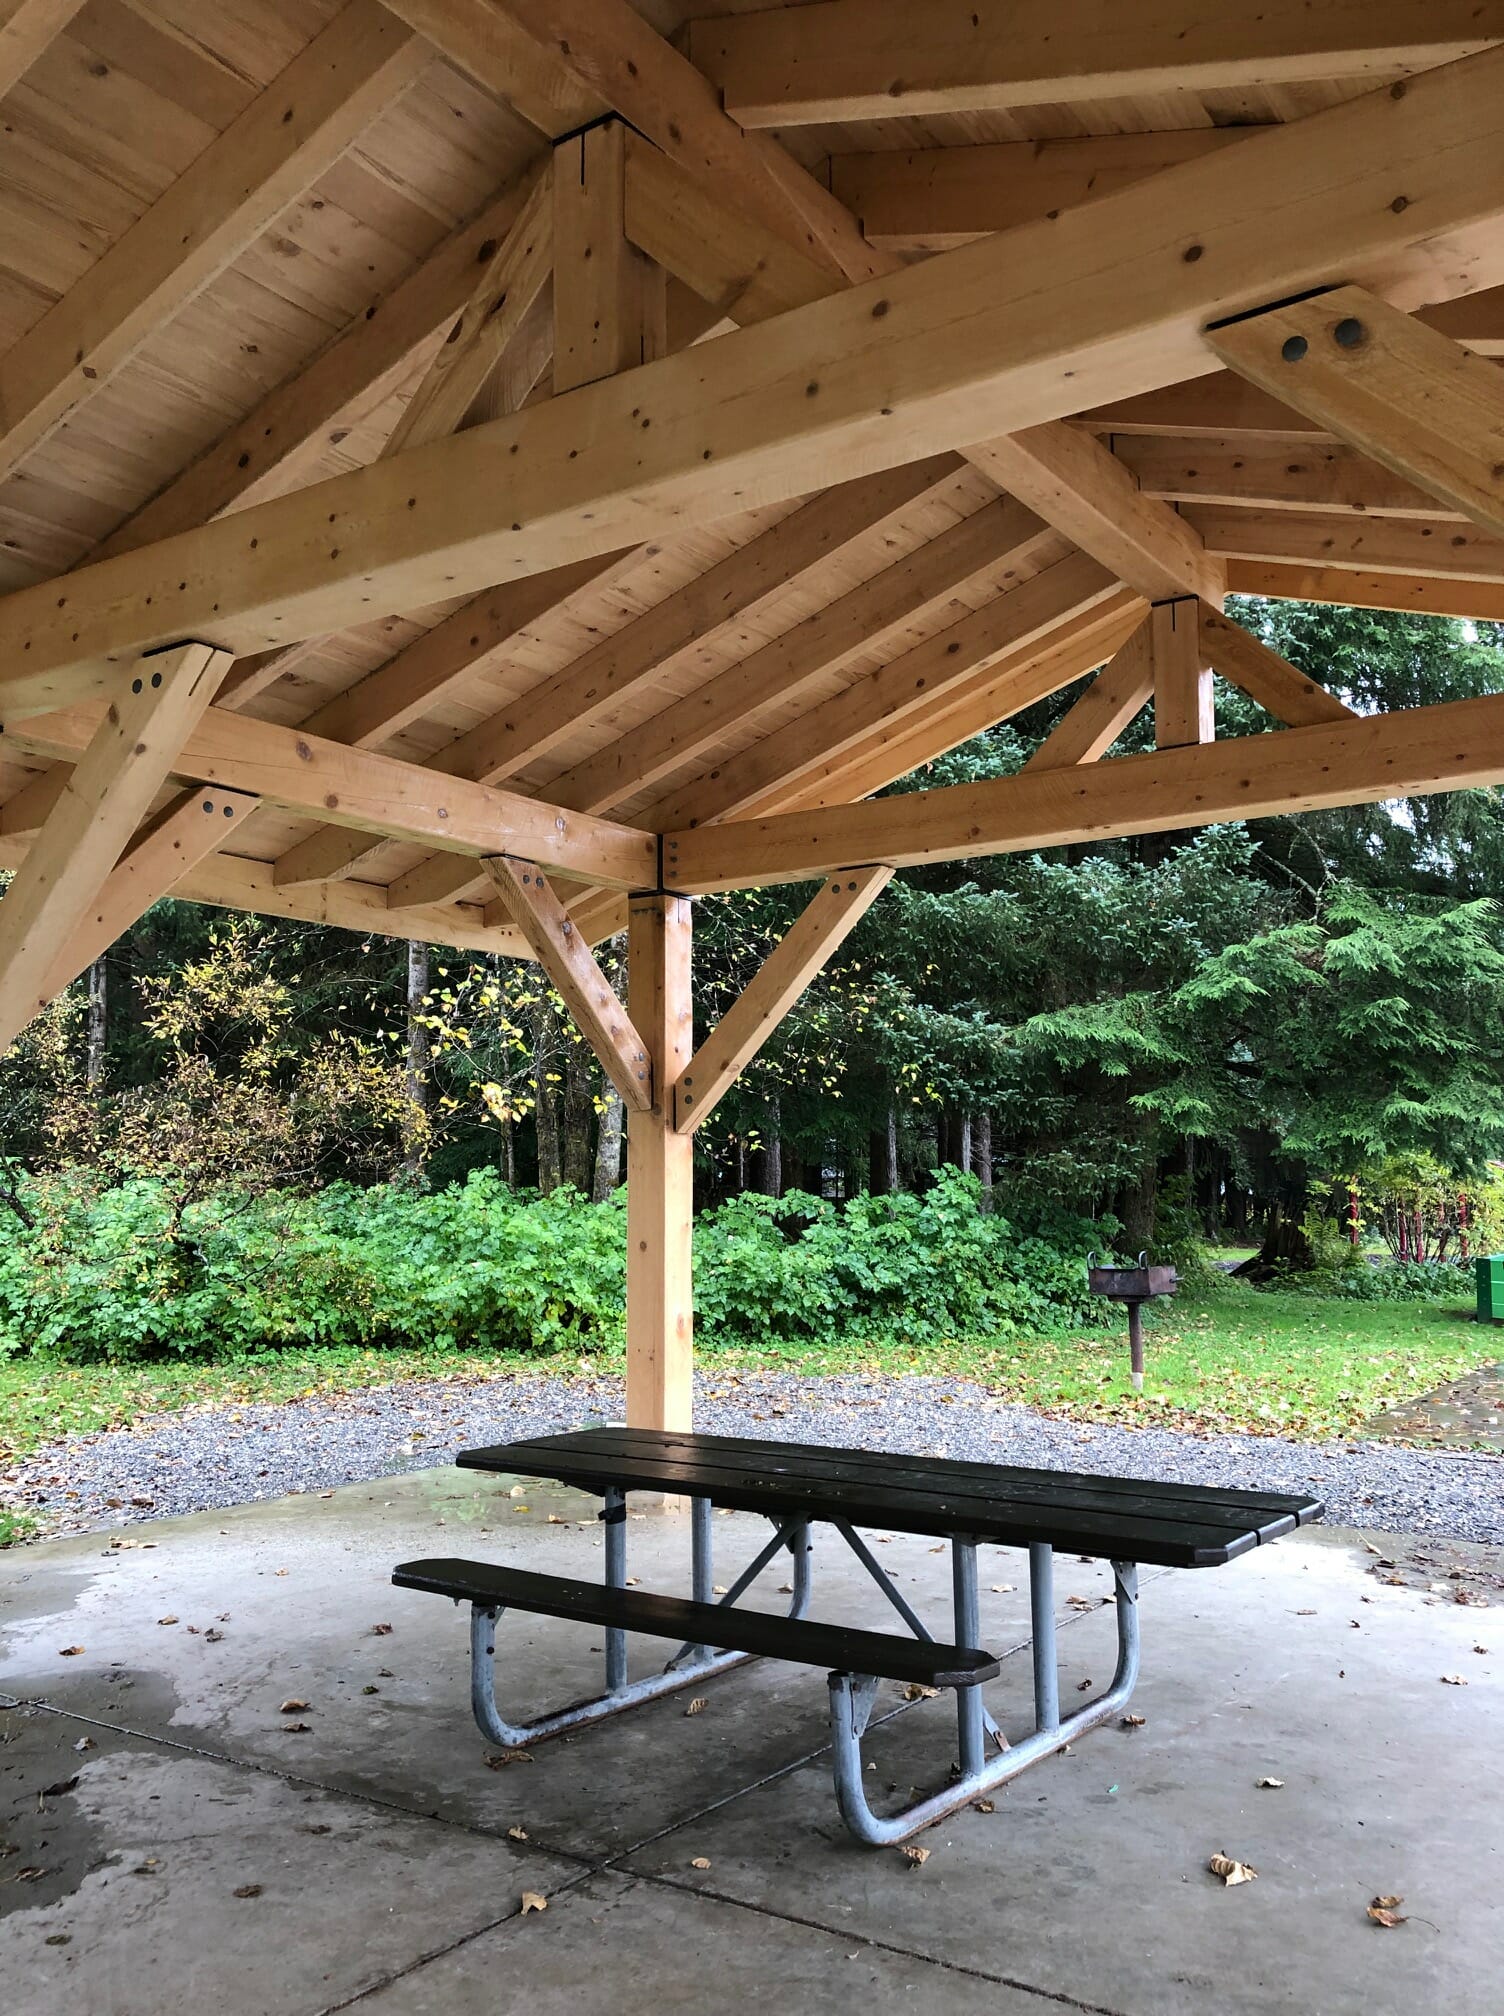 Accessible table sits under the Riverside Rotary Park shelter.